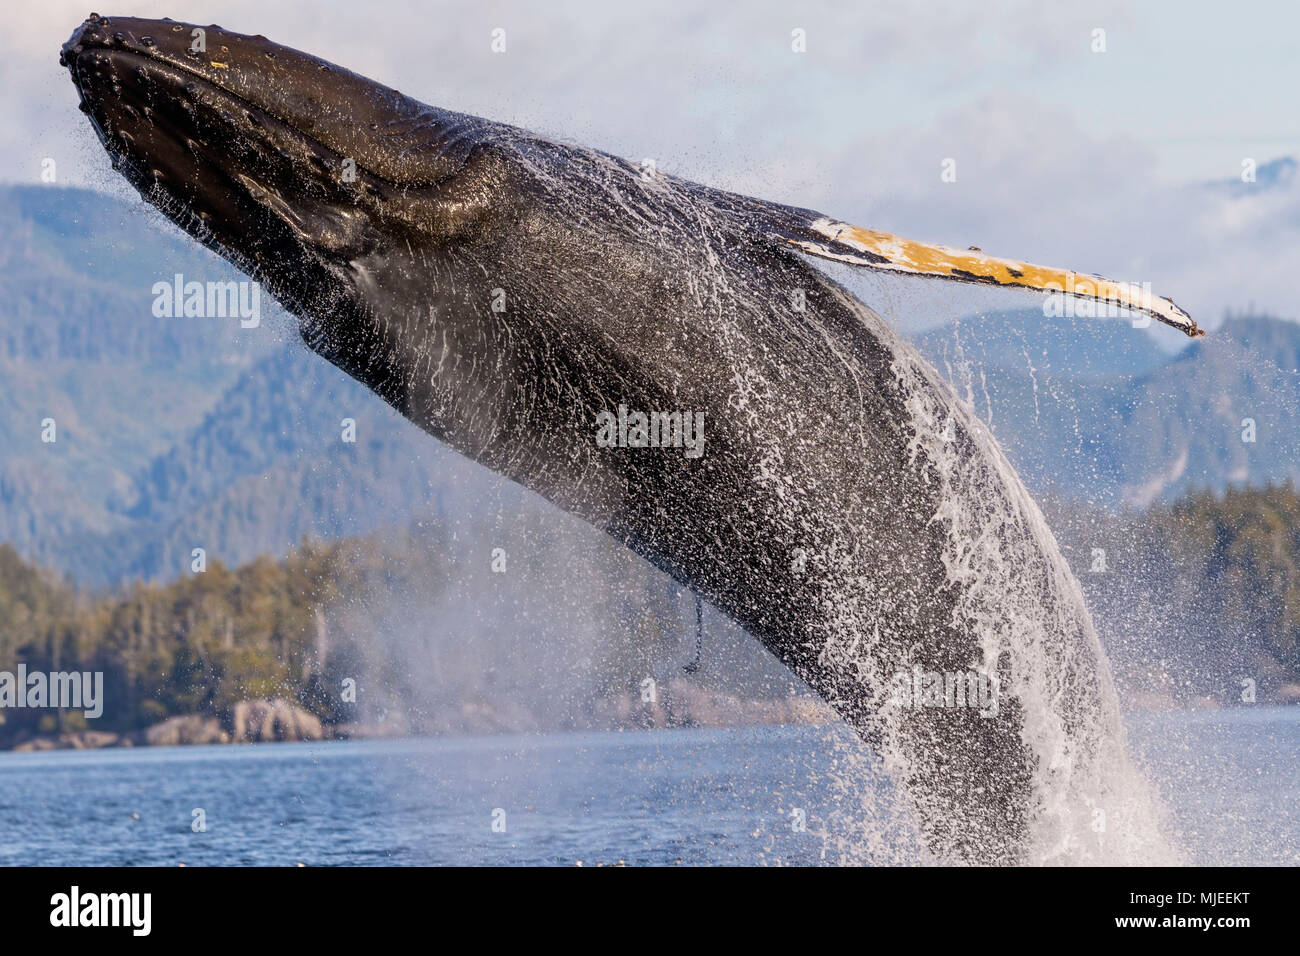 Humpback whale (Megaptera novaengliae) breaching in front of the British Columbia Coastal Mountains in Queen Charlotte Strait off Vancouver Island, British Columbia, Canada. Stock Photo